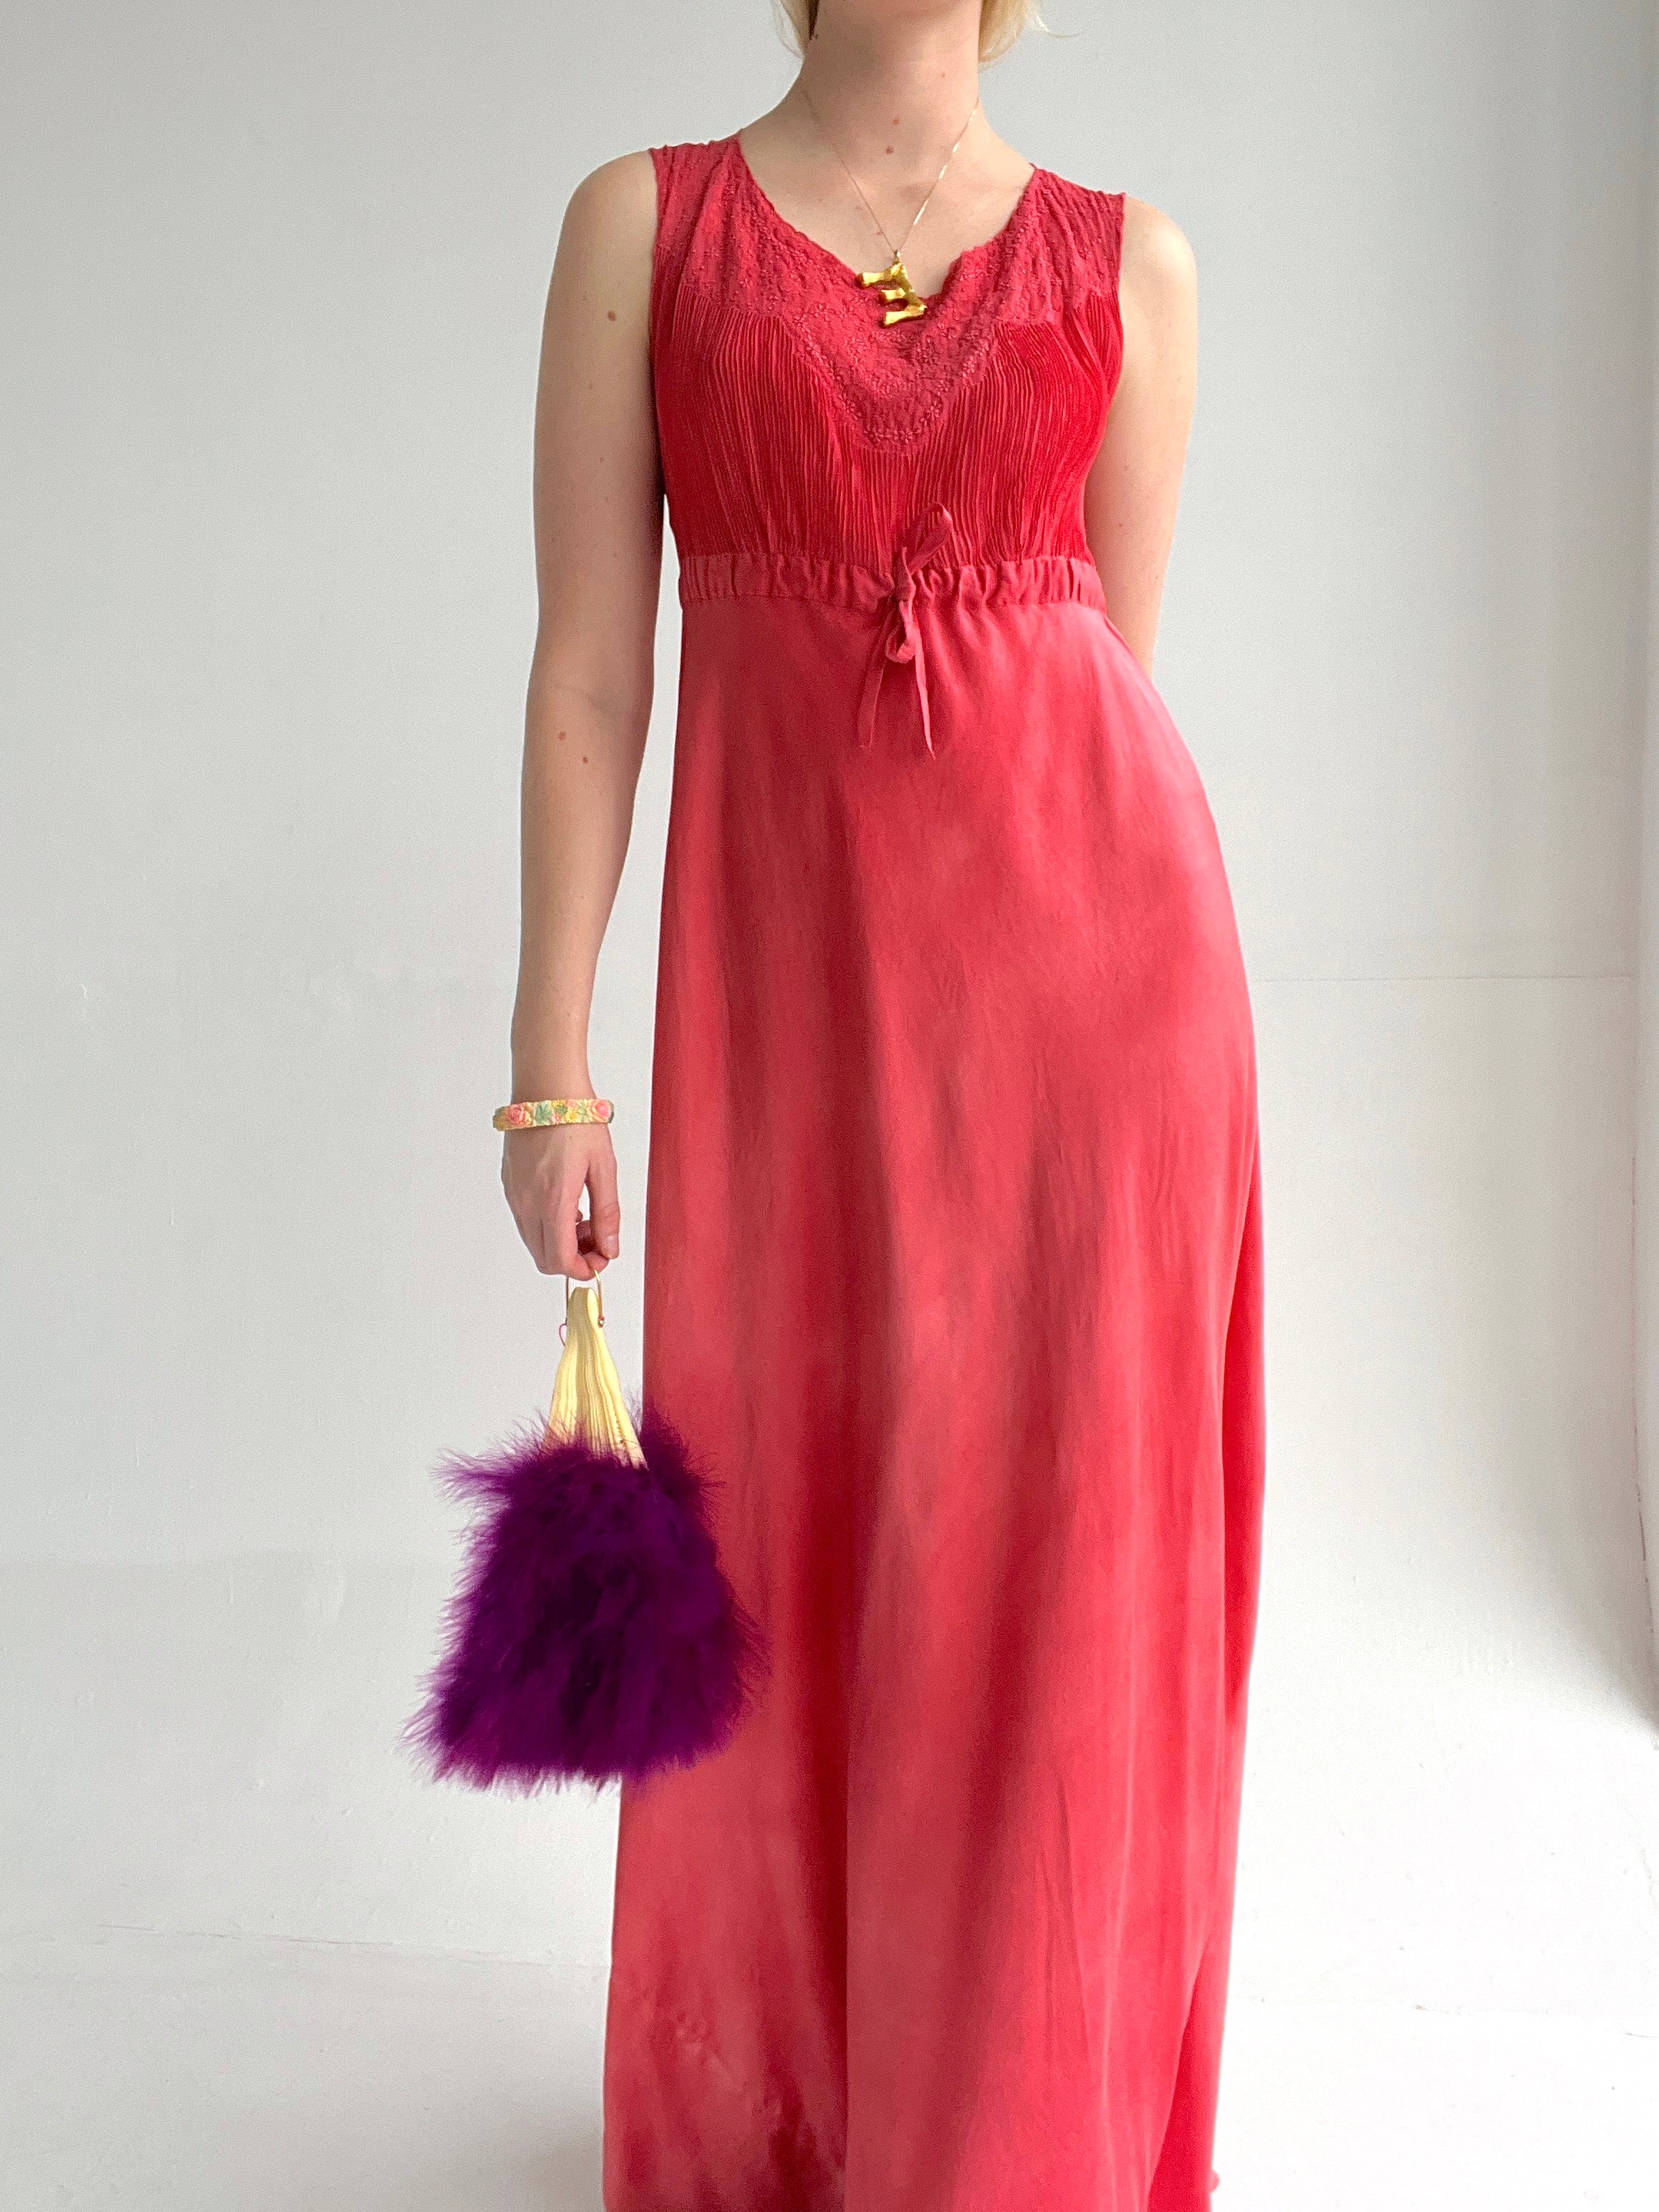 Hand Dyed Coral Silk Dress